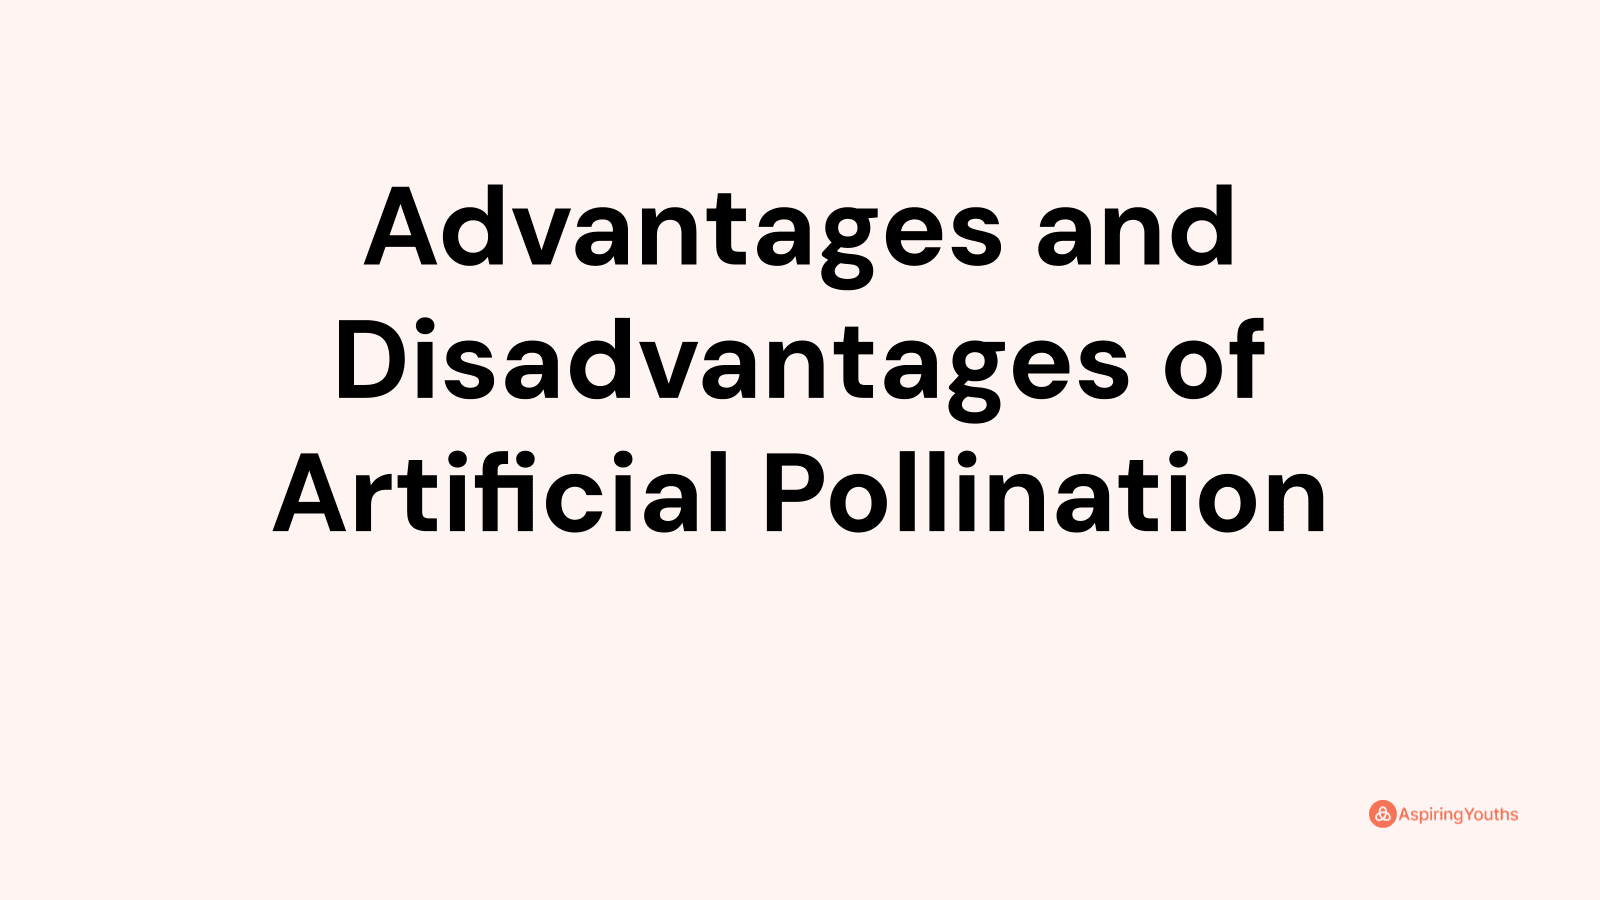 Advantages and disadvantages of Artificial Pollination